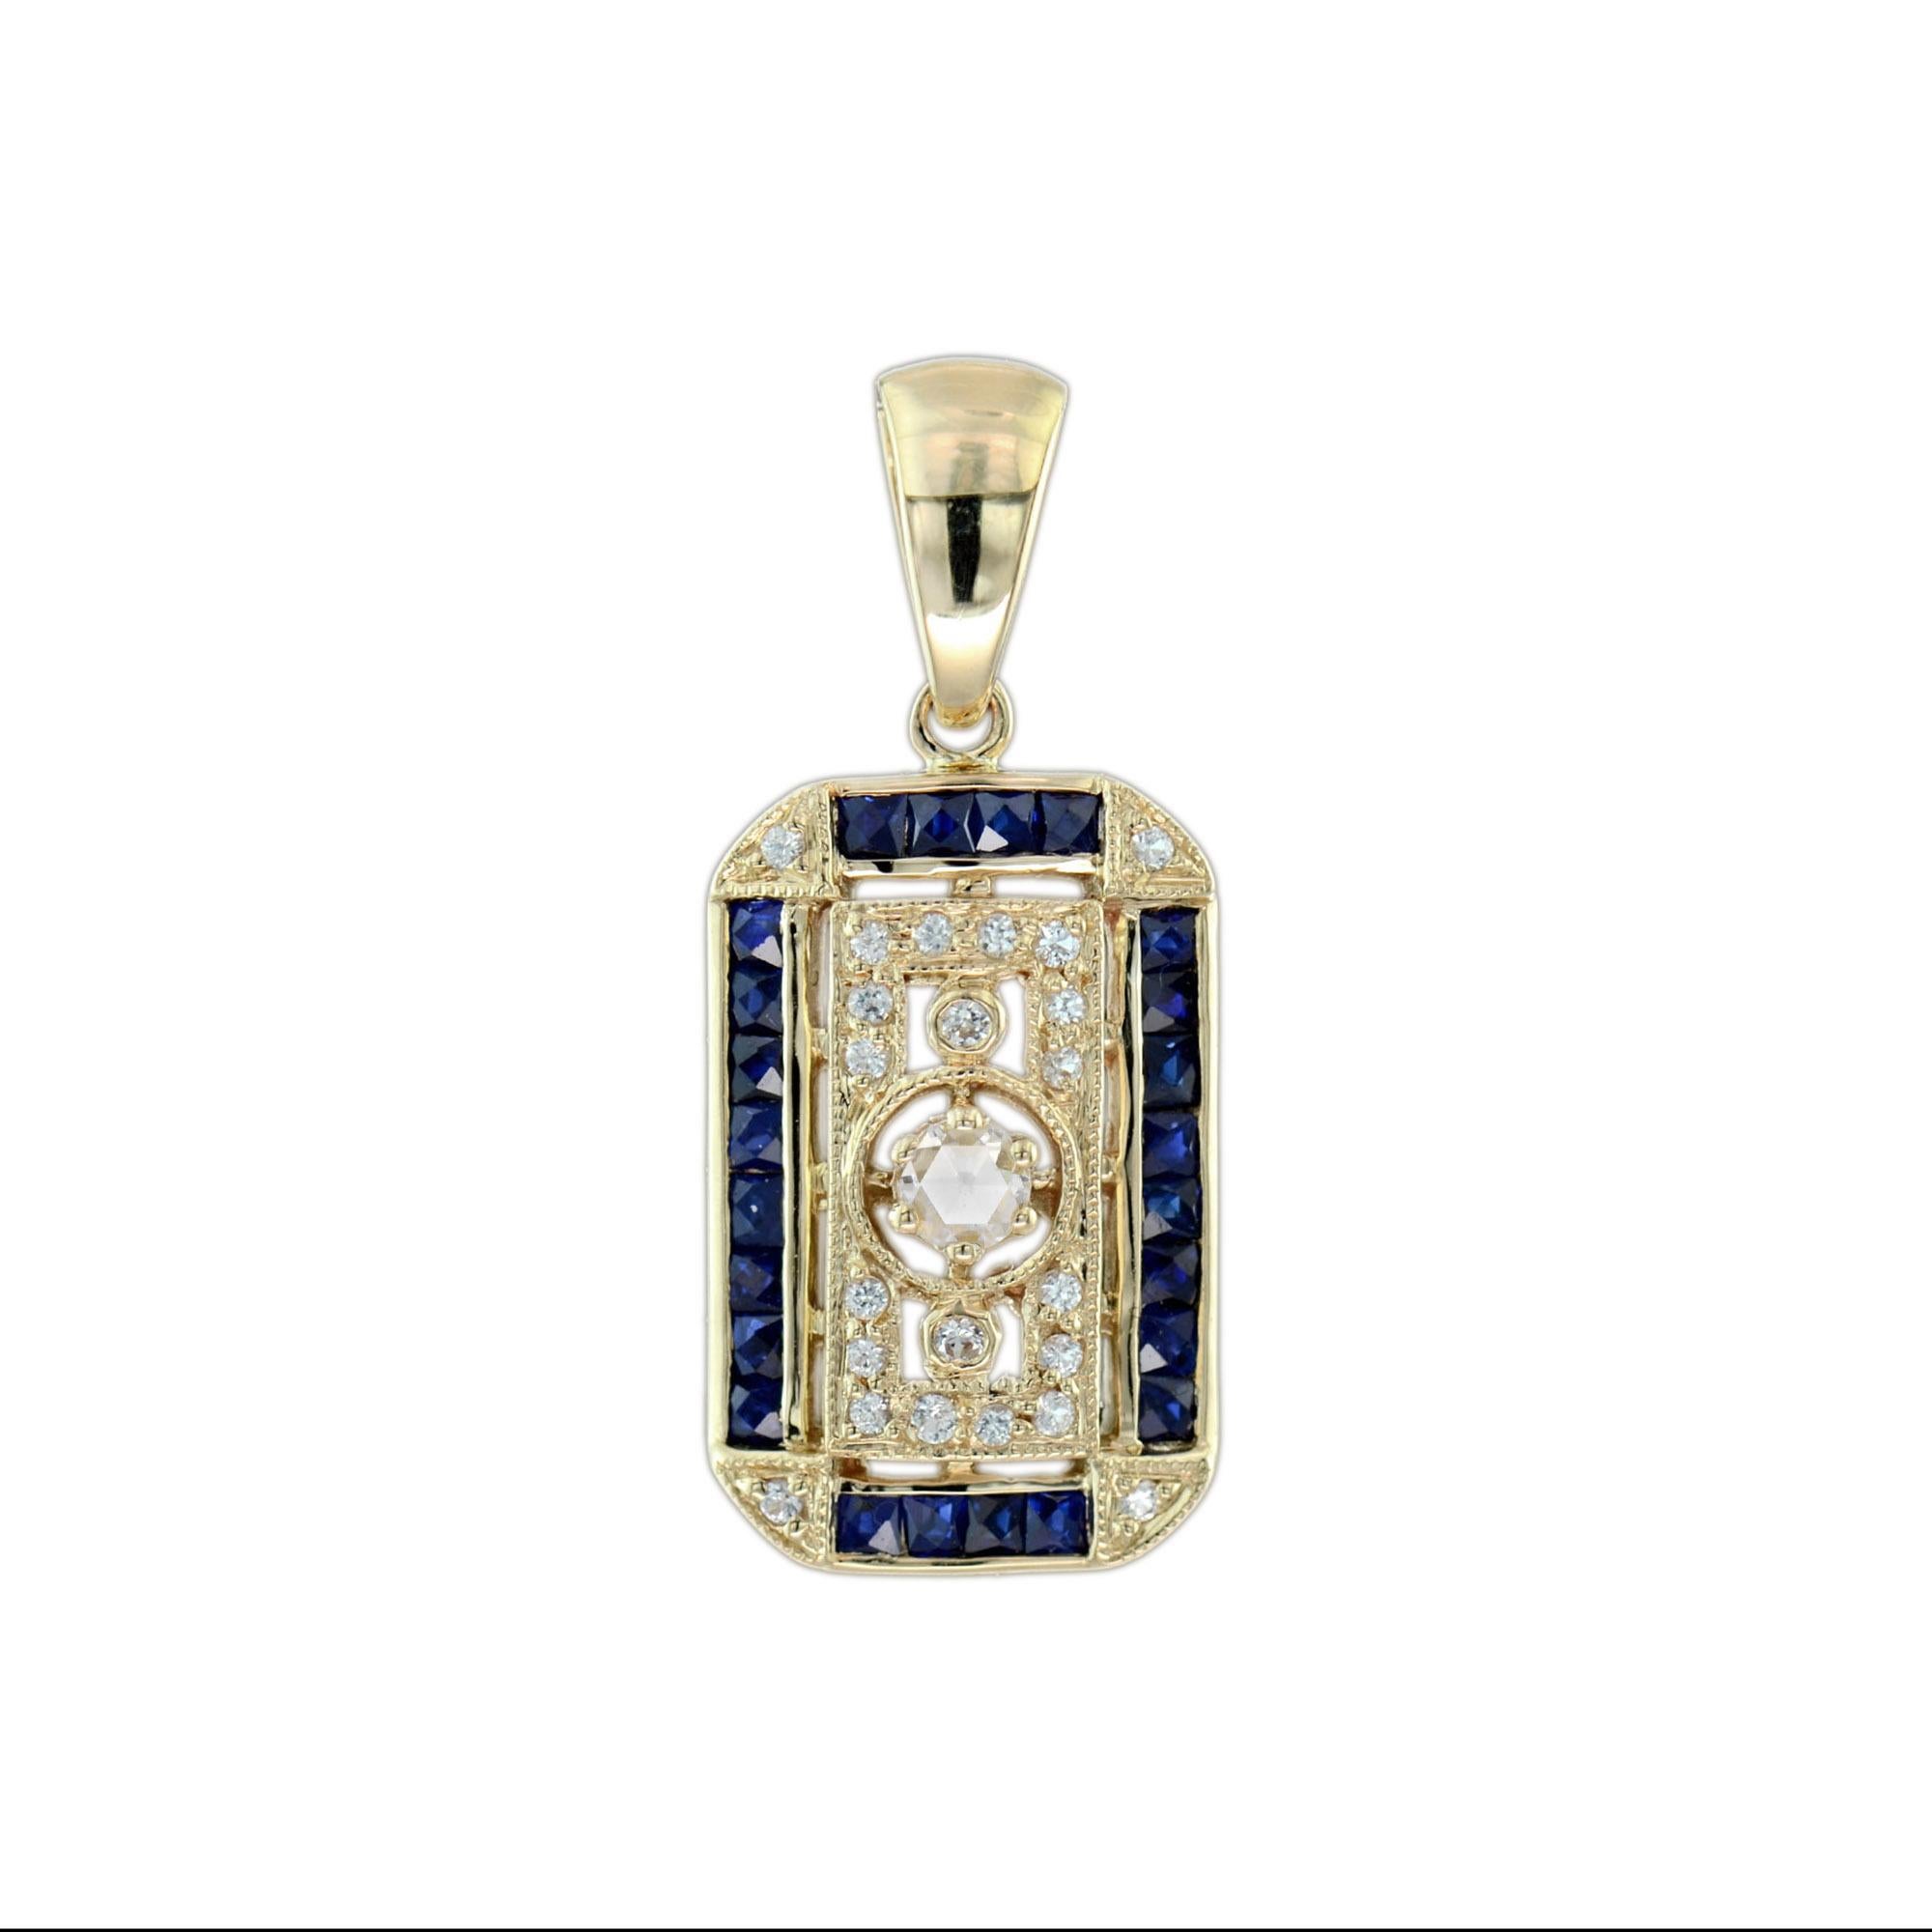 Stunning Antique inspired diamond and sapphire pendant. Bezel set in the center is an old cut diamond of approx. 0.11 carat. The outer columns are adorned with a beaded design. Framing the entire design are narrow French cut baguette shaped